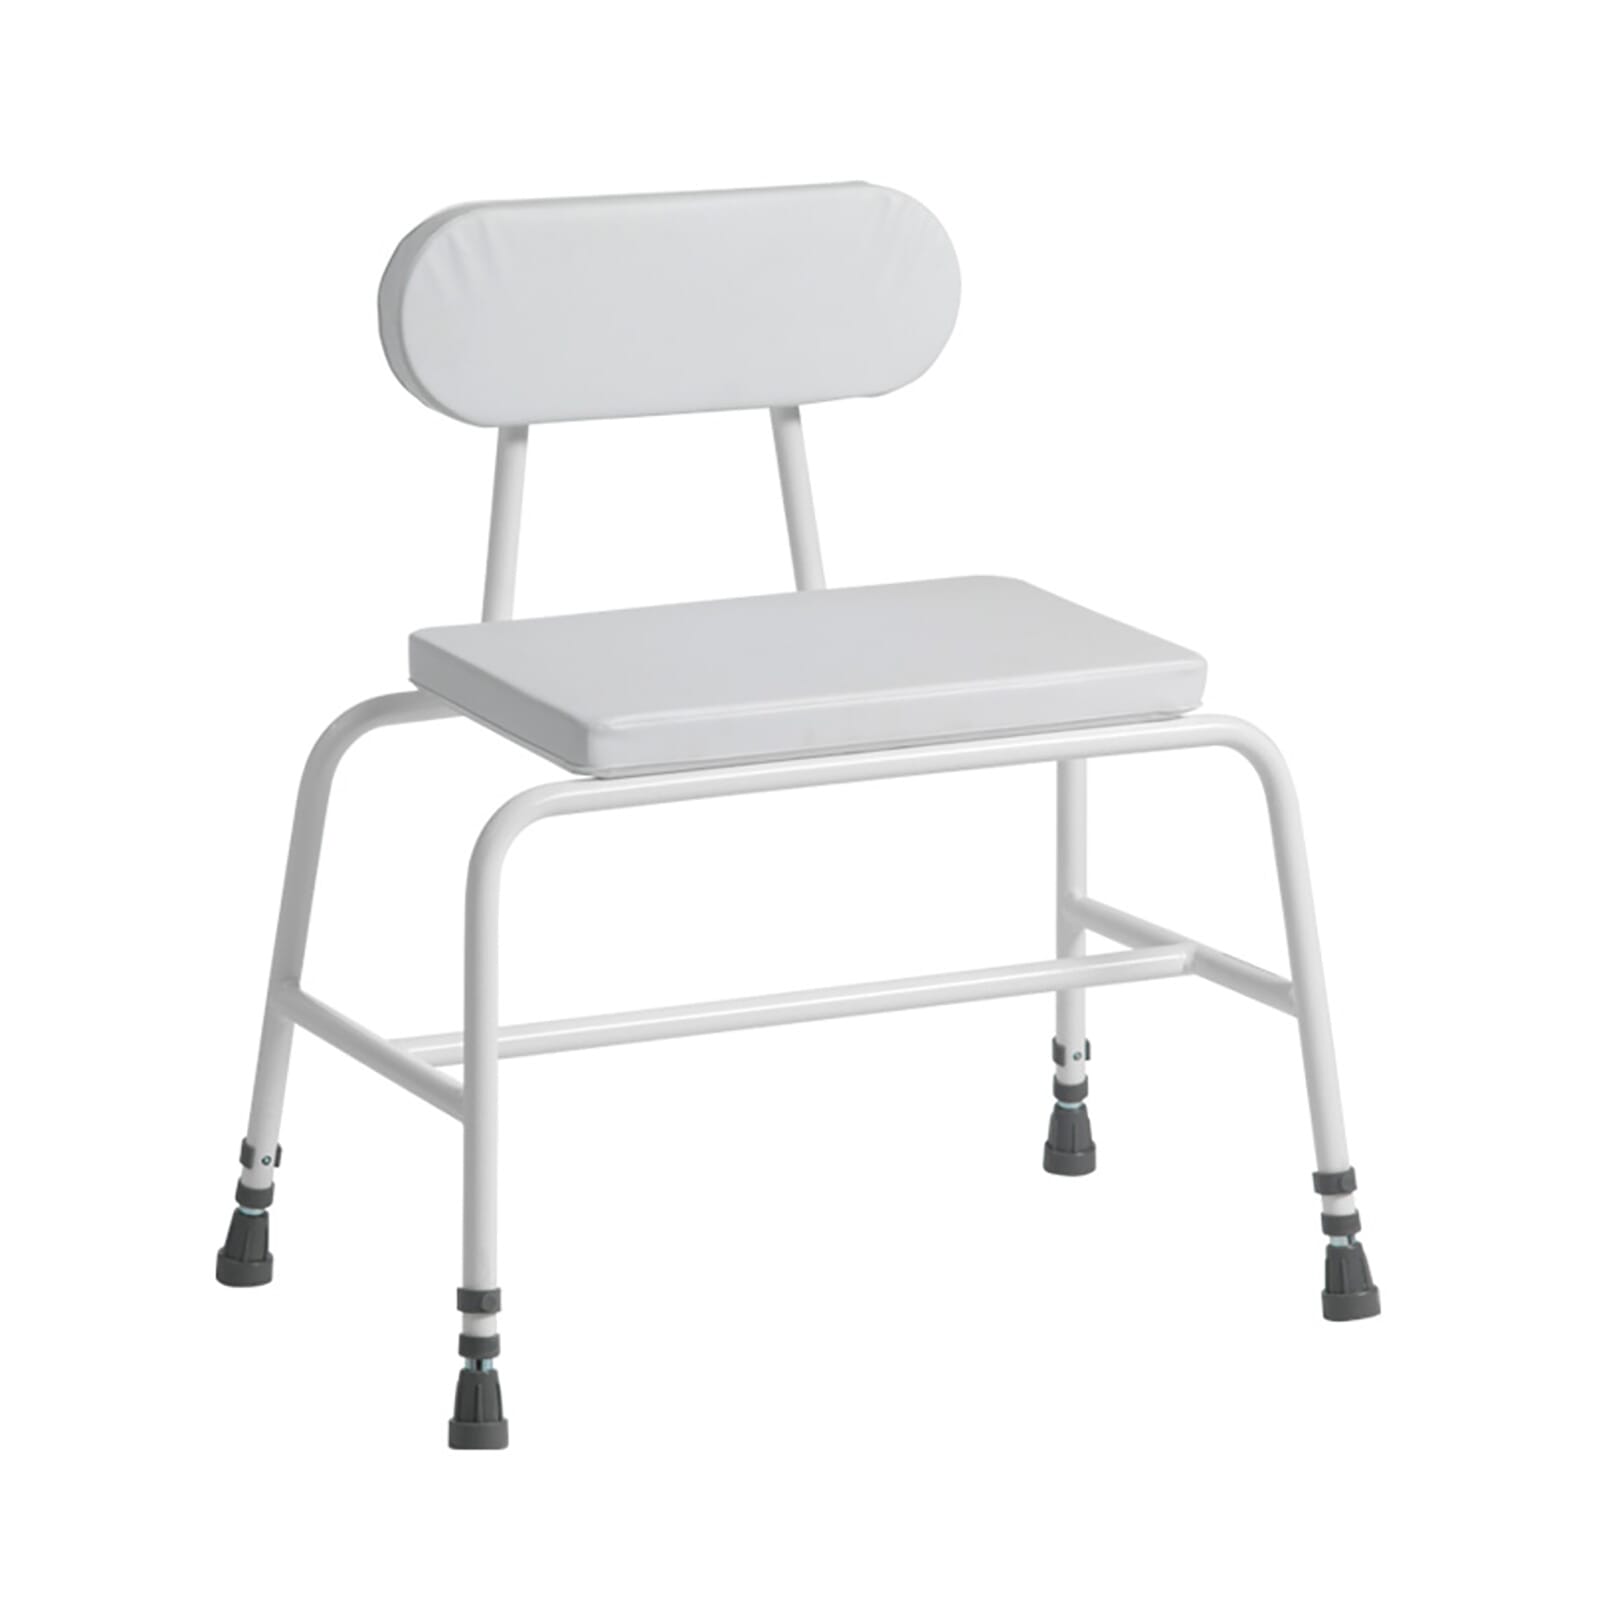 View Bariatric Perching Kitchen Stool Stool with Padded Back information